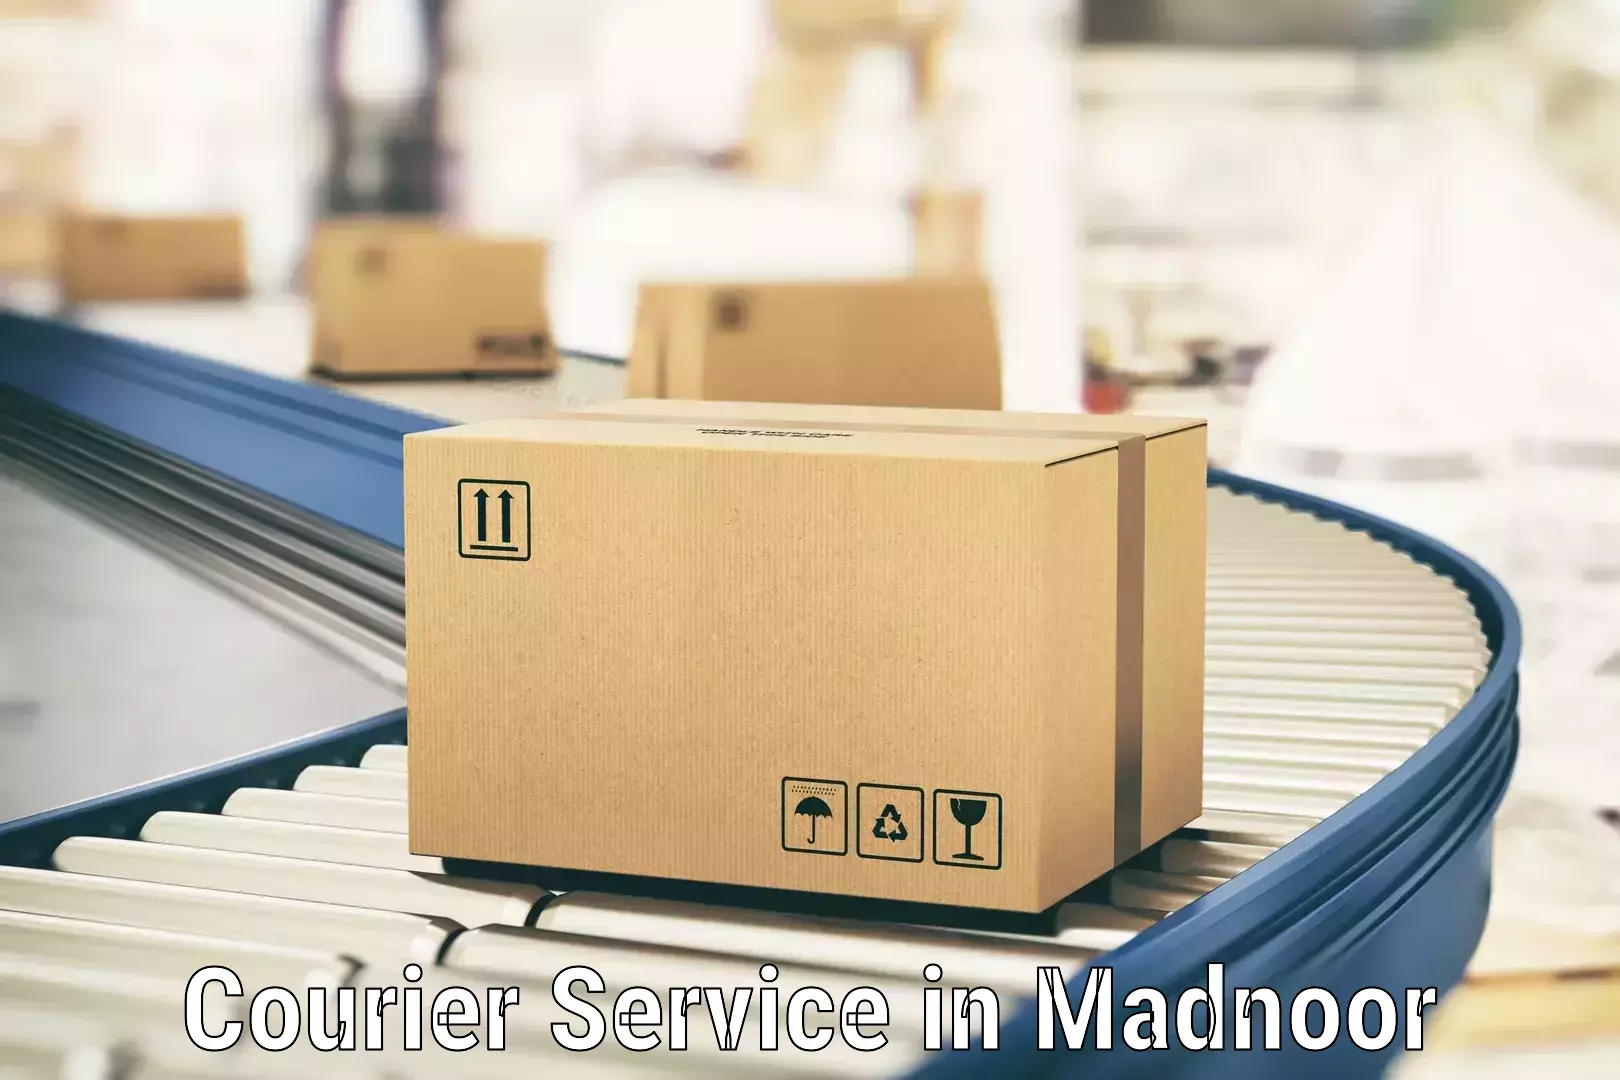 On-demand shipping options in Madnoor